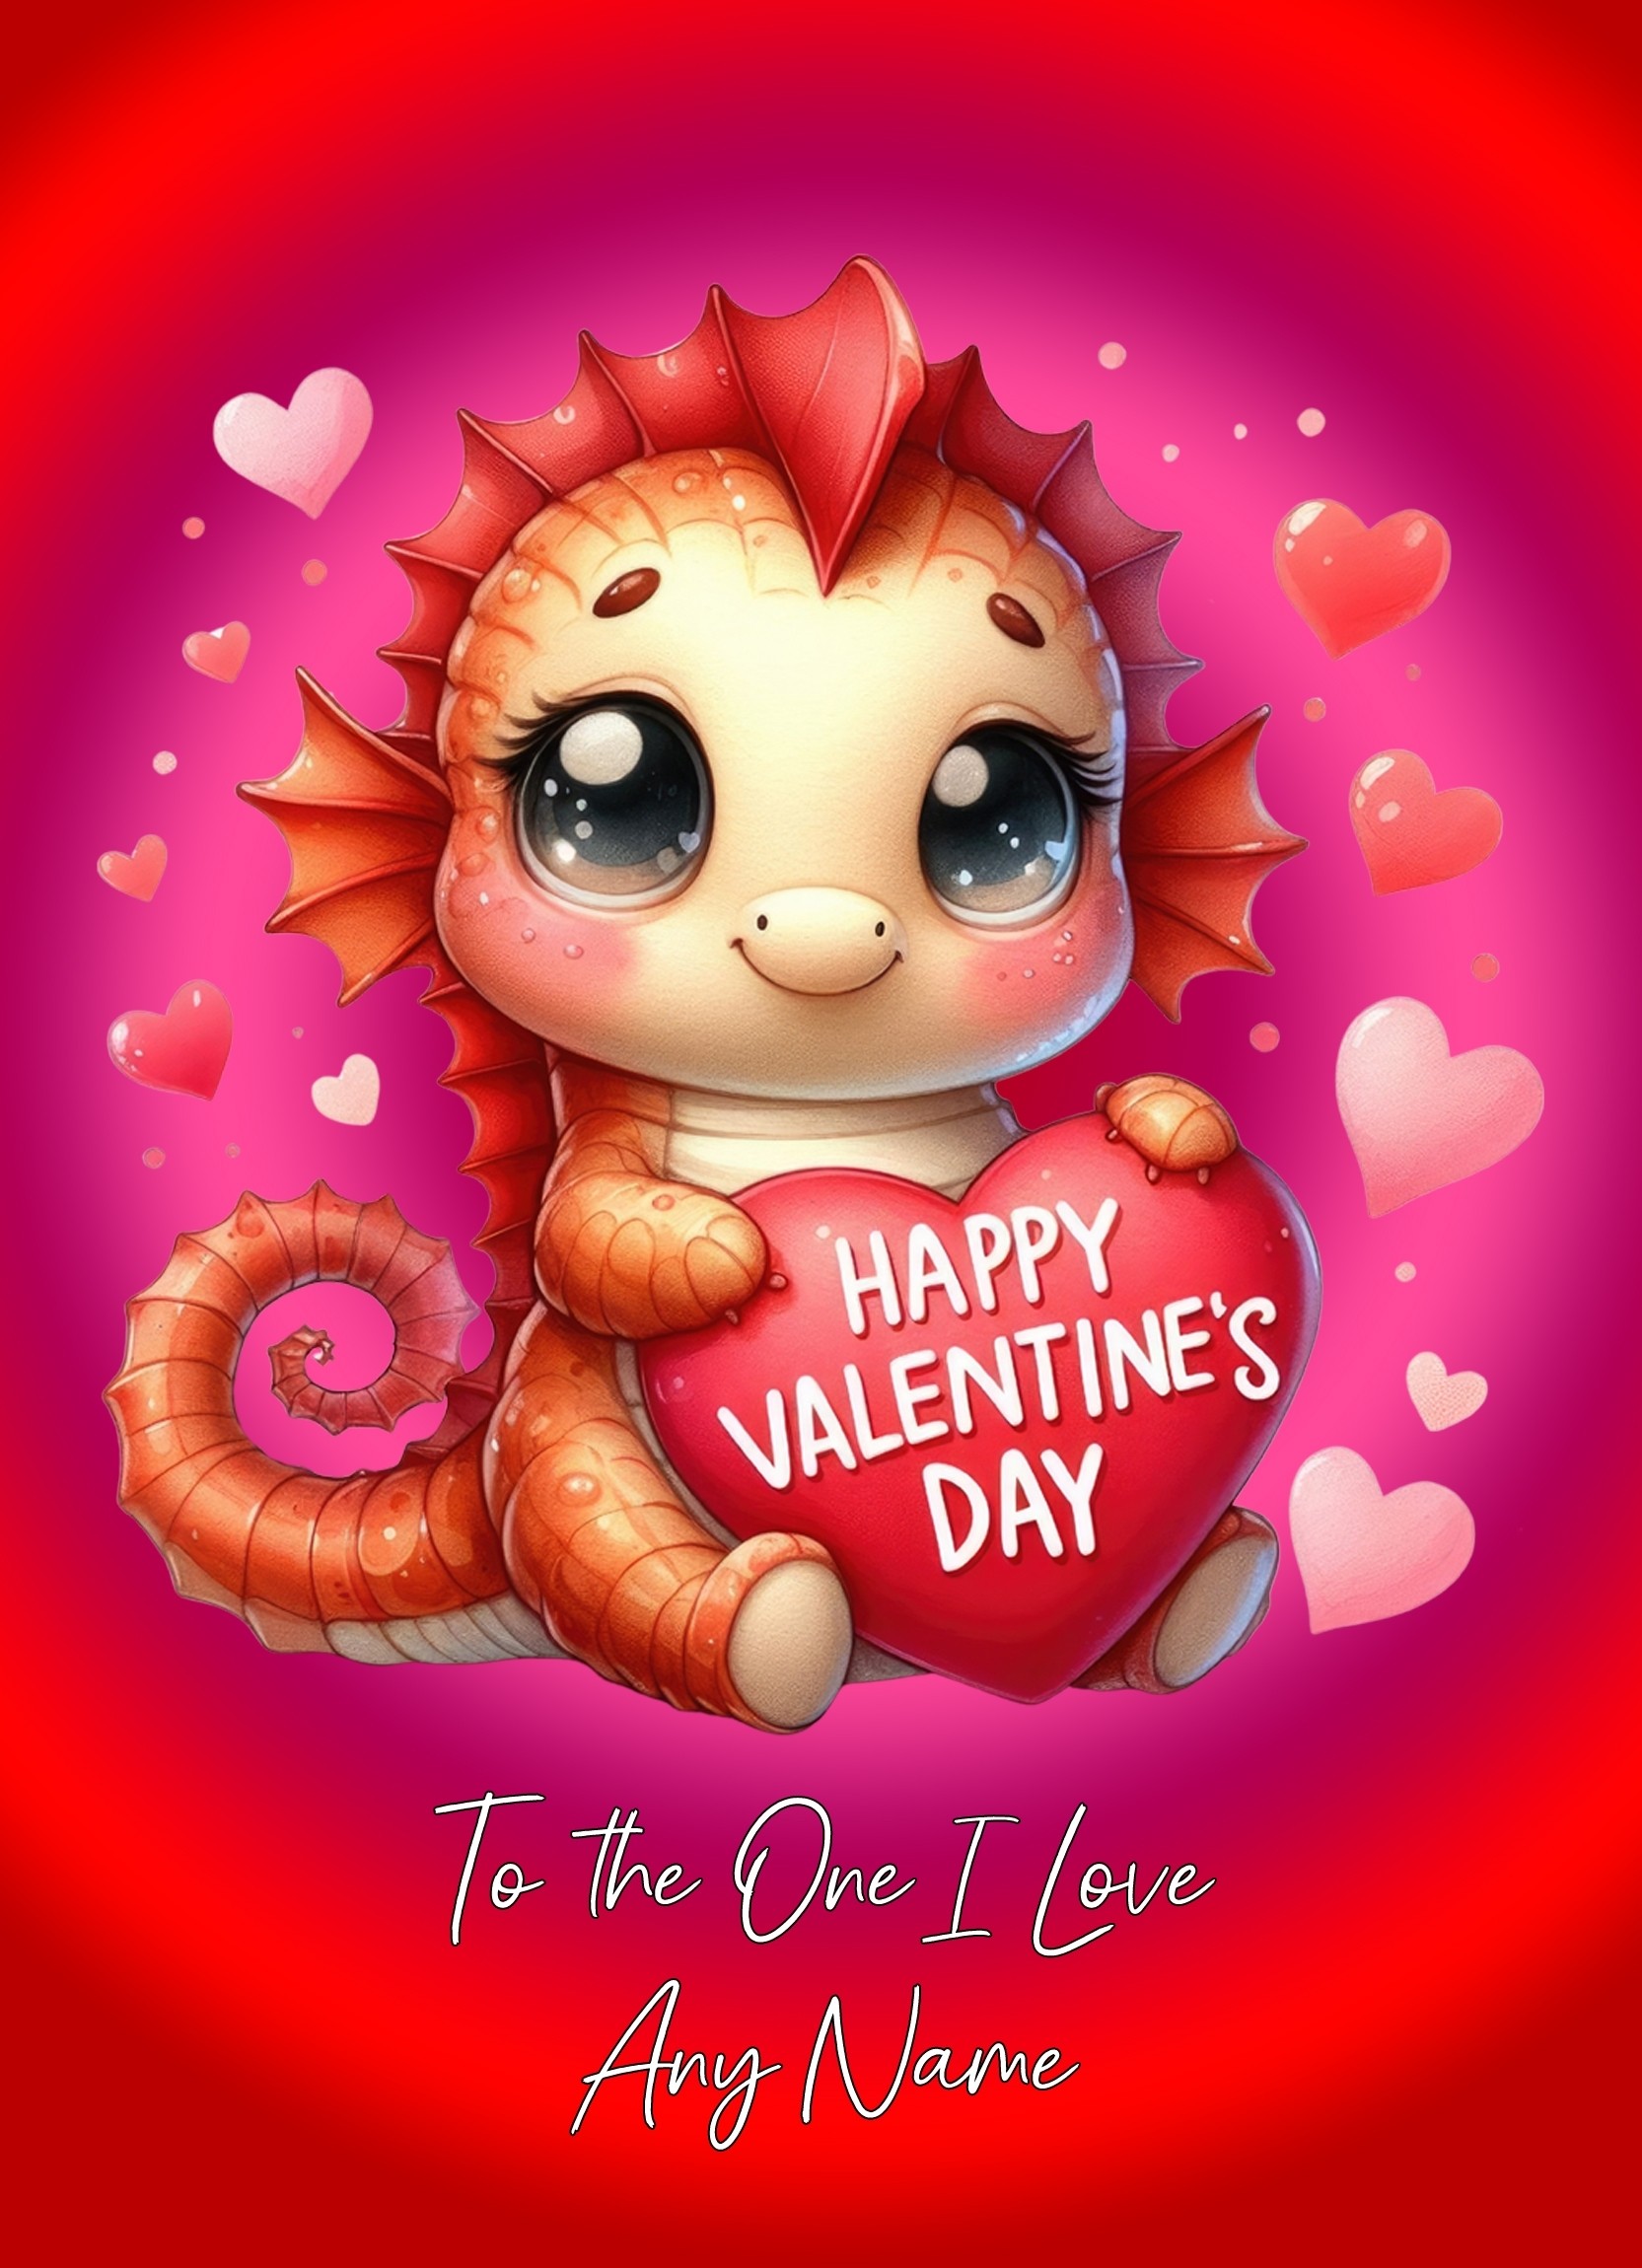 Personalised Valentines Day Card for One I Love (Dragon)